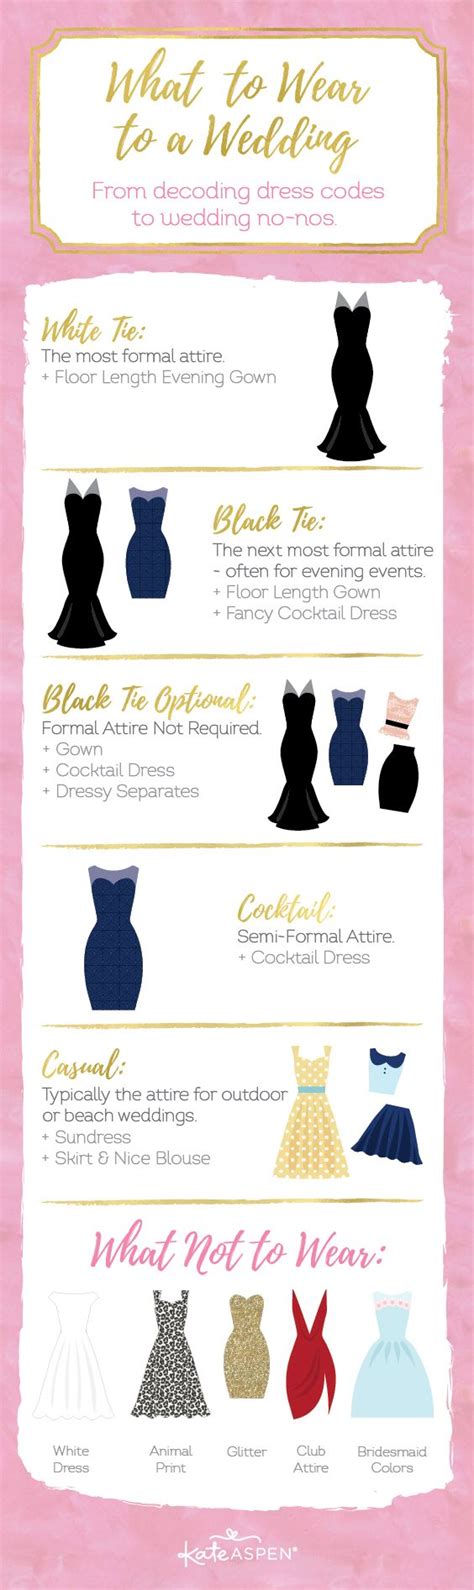 An Info Sheet Showing The Different Types Of Wedding Gowns And Their